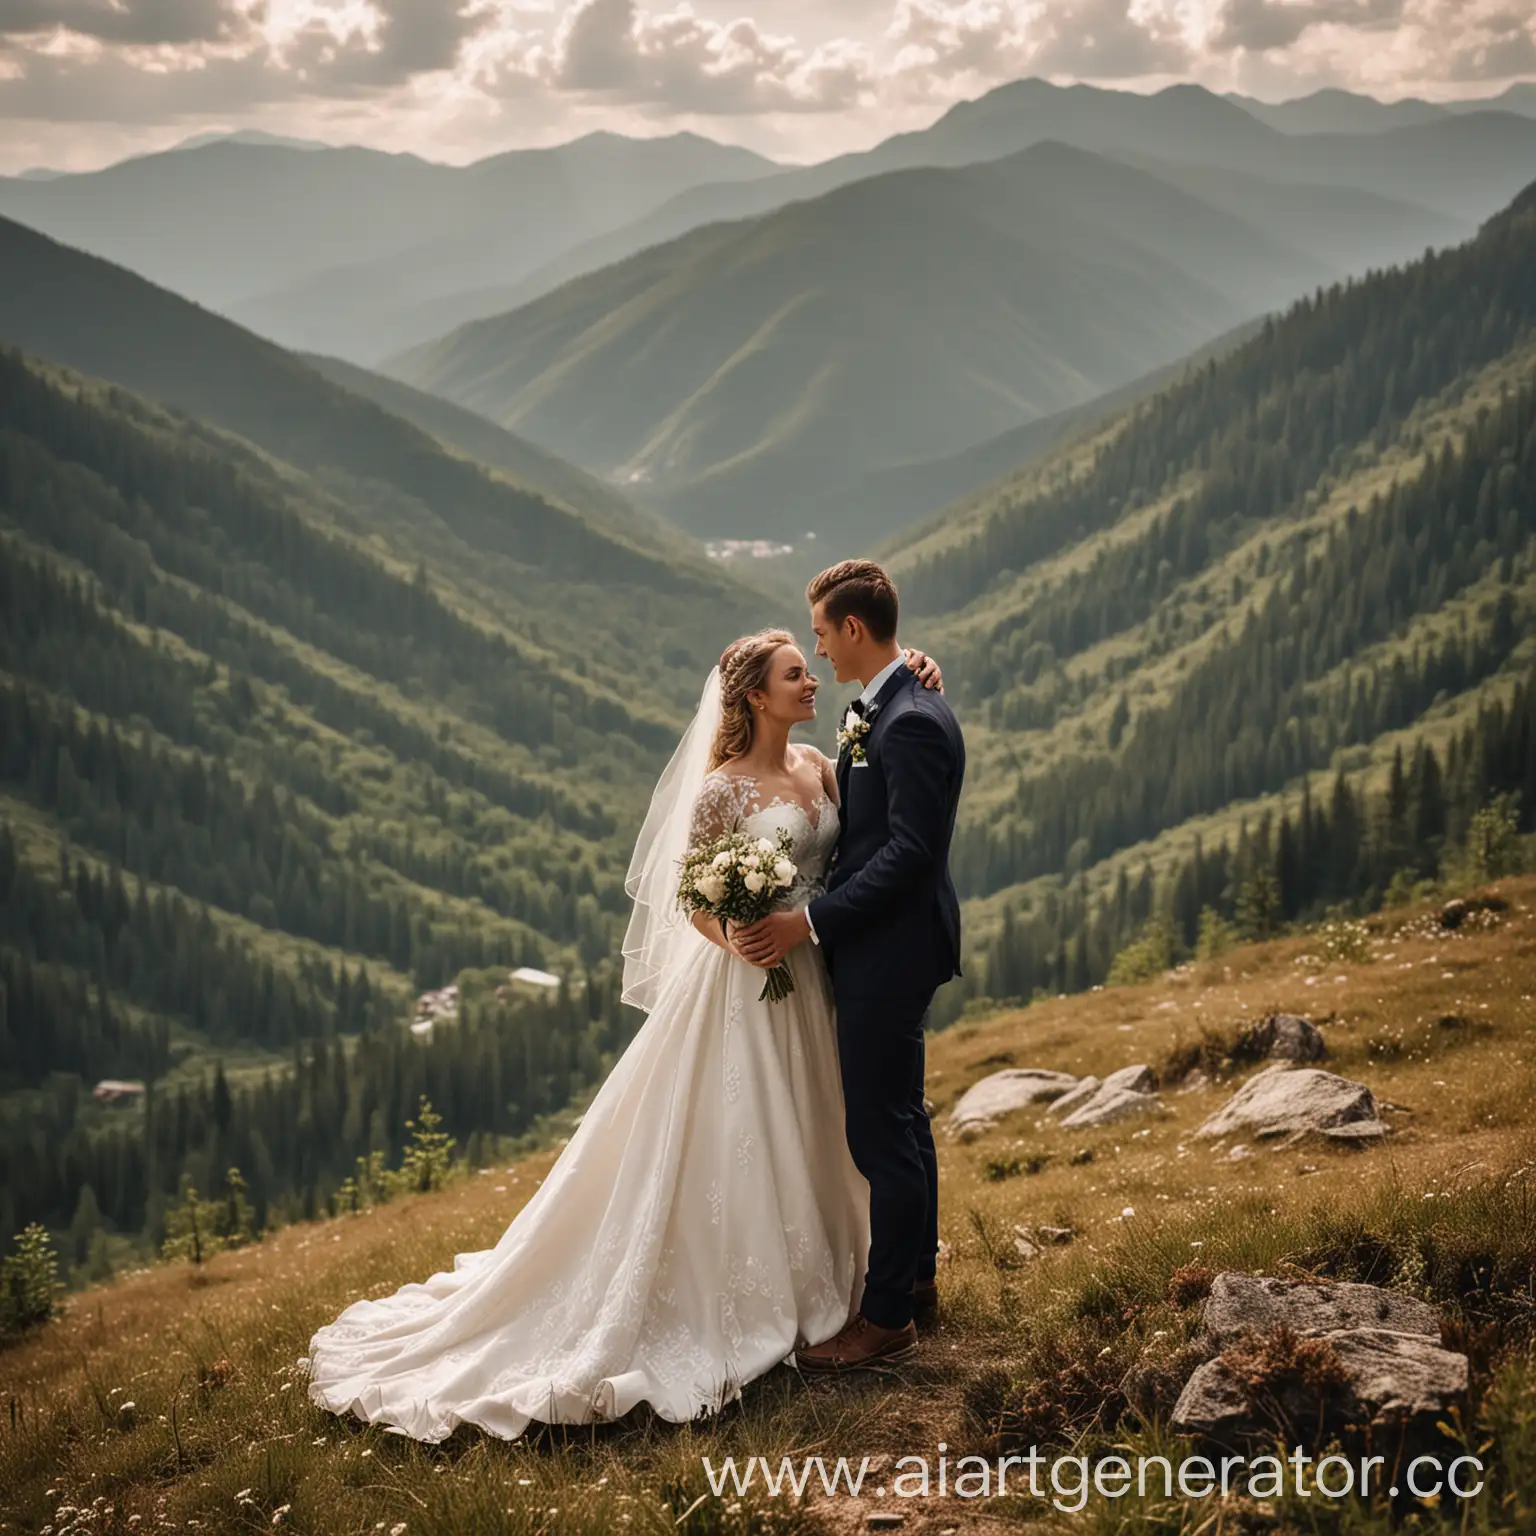 Newlyweds-Embracing-in-Majestic-Mountain-Landscape